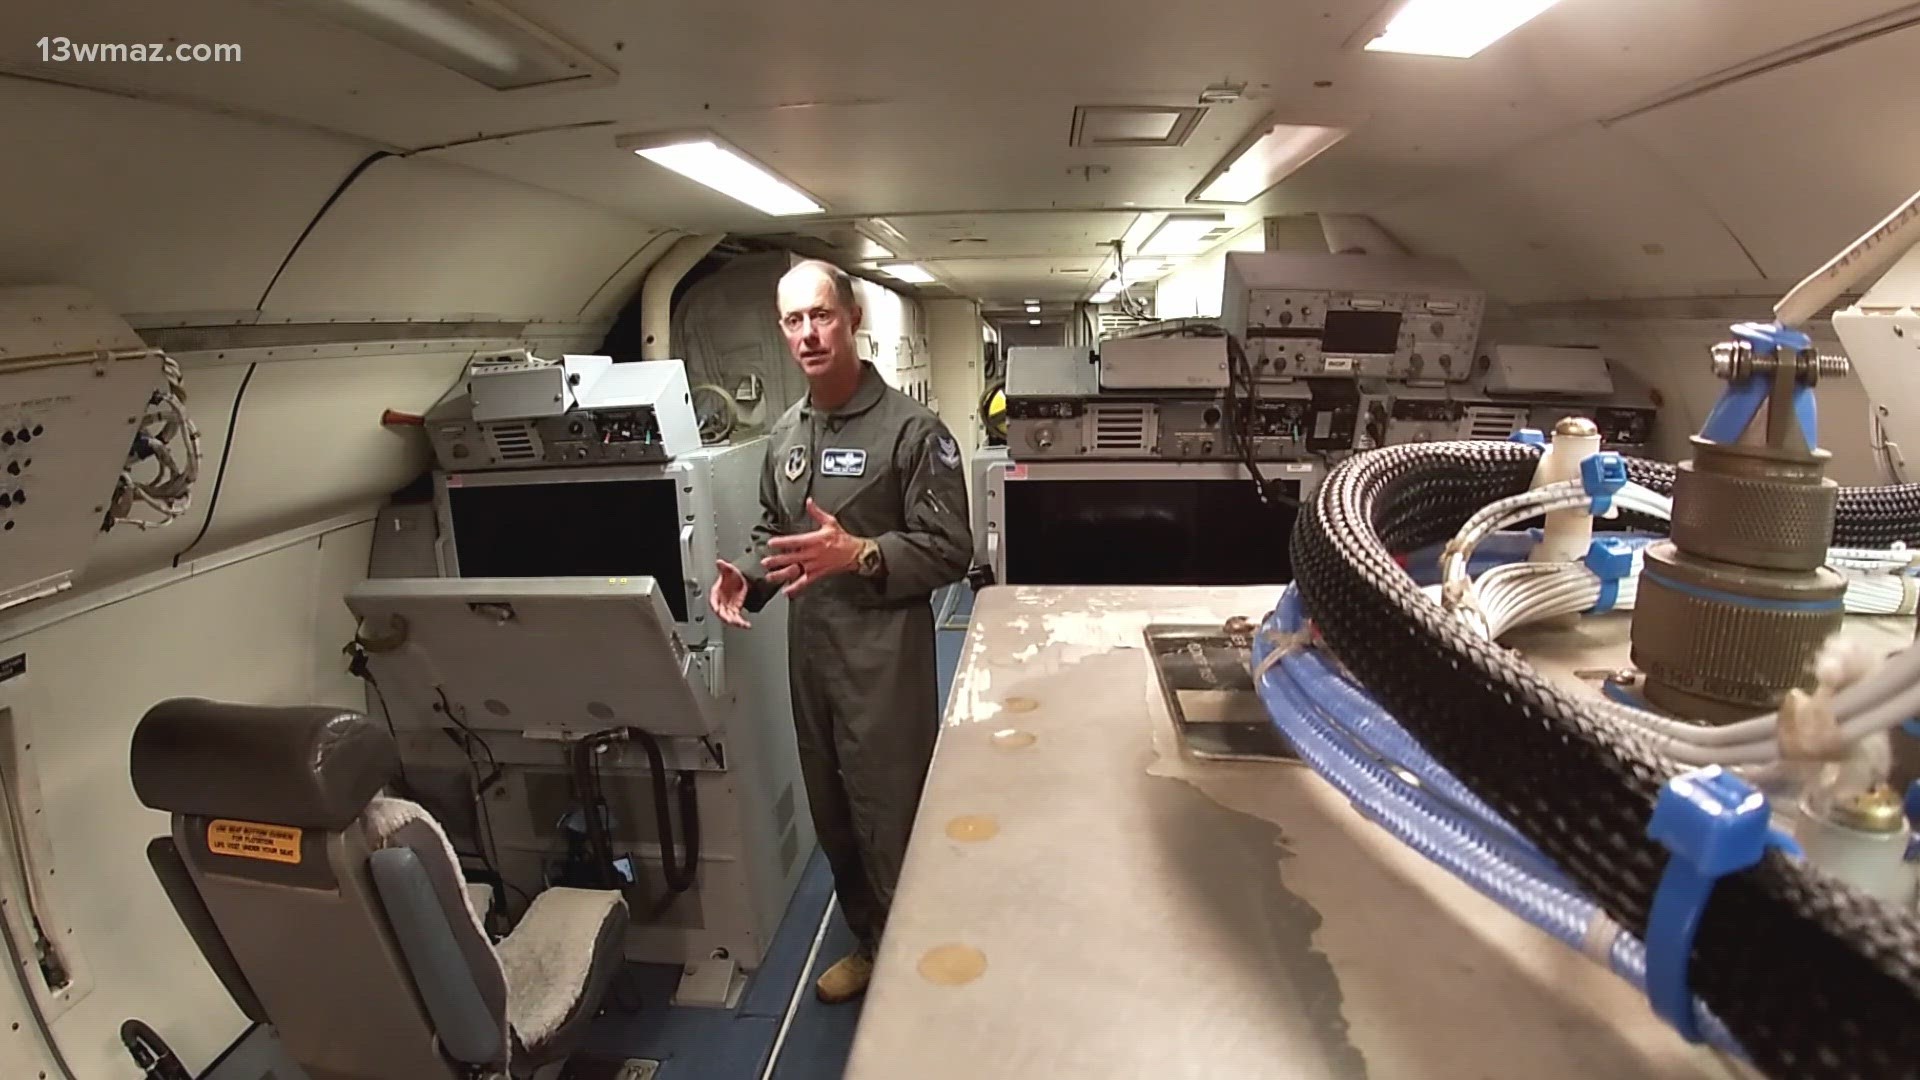 The JSTARS do a lot of highly classified work, but before the last jet left Robins, we got a look inside the plane.